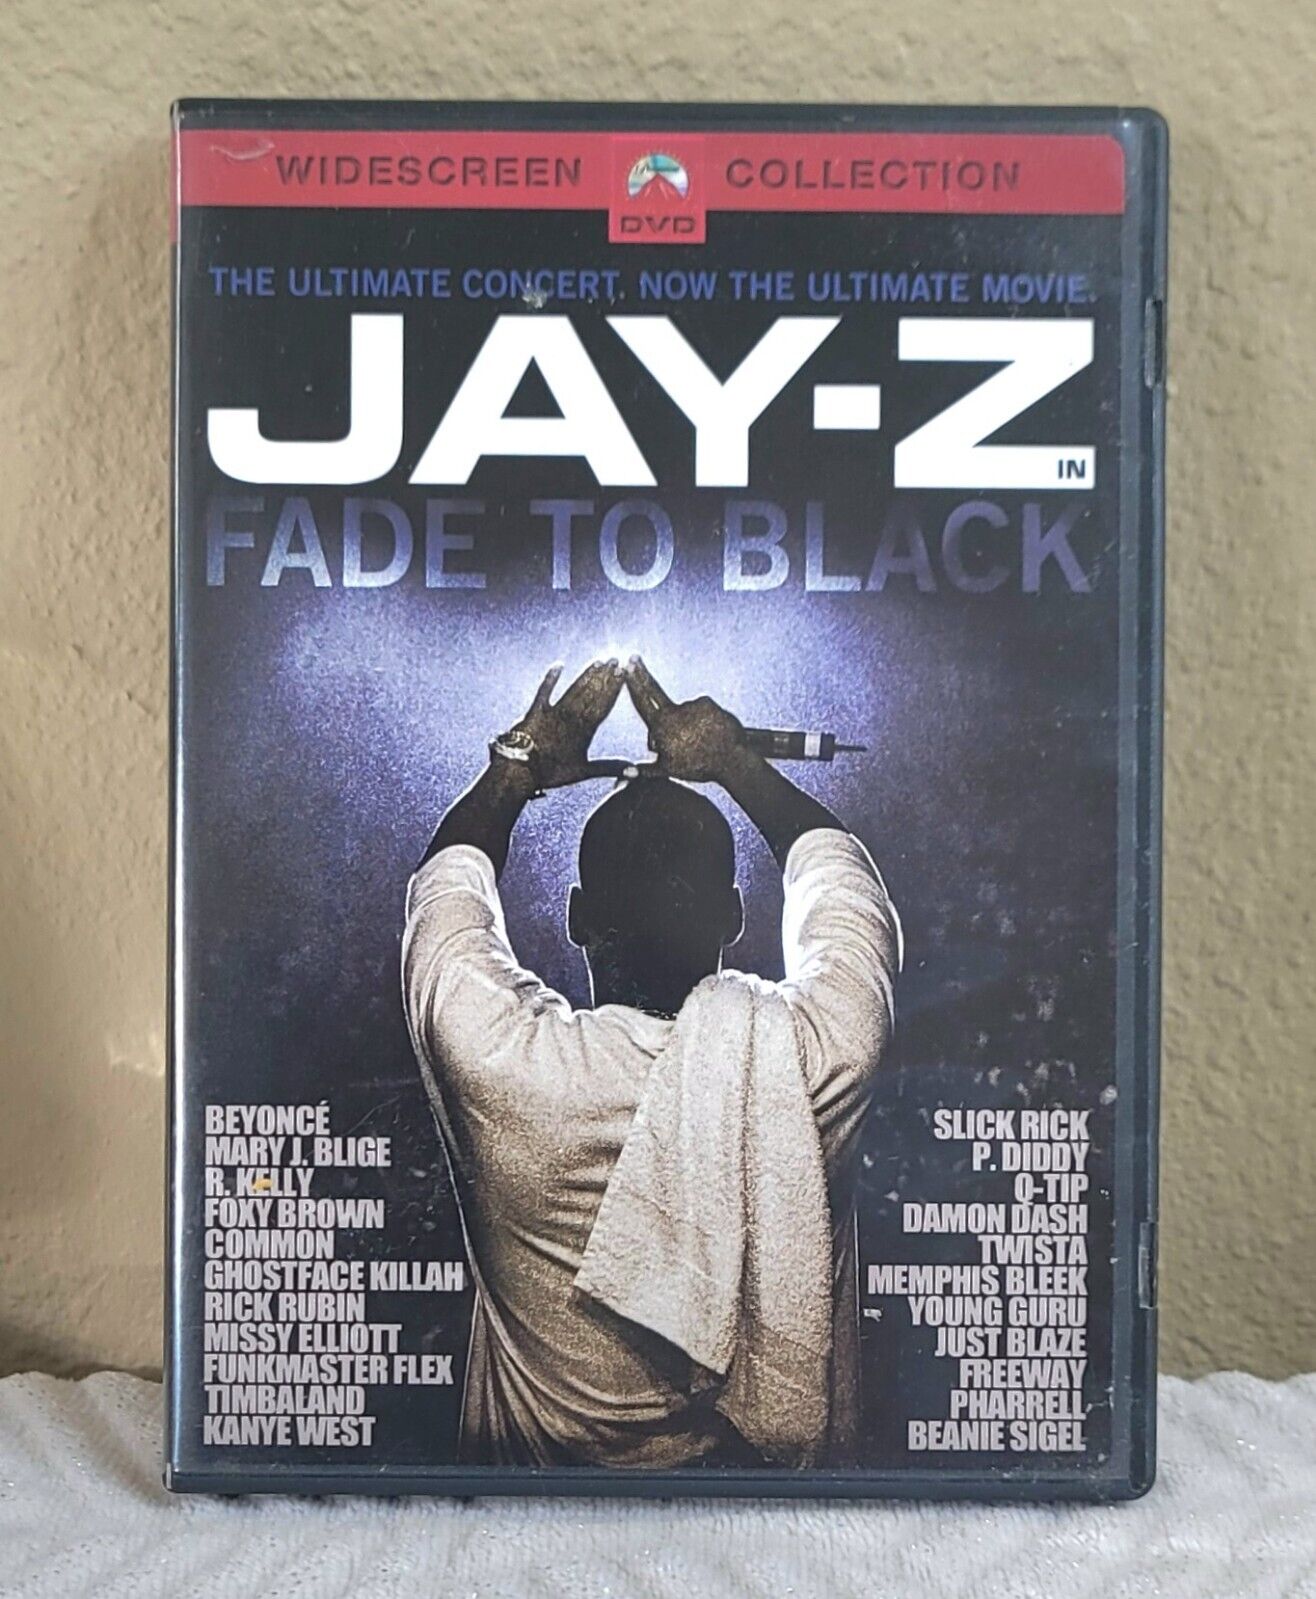 Jay Z - Fade to Black (DVD, 2005) feat. Beyonce Kanye West Wide Screen DVD. 